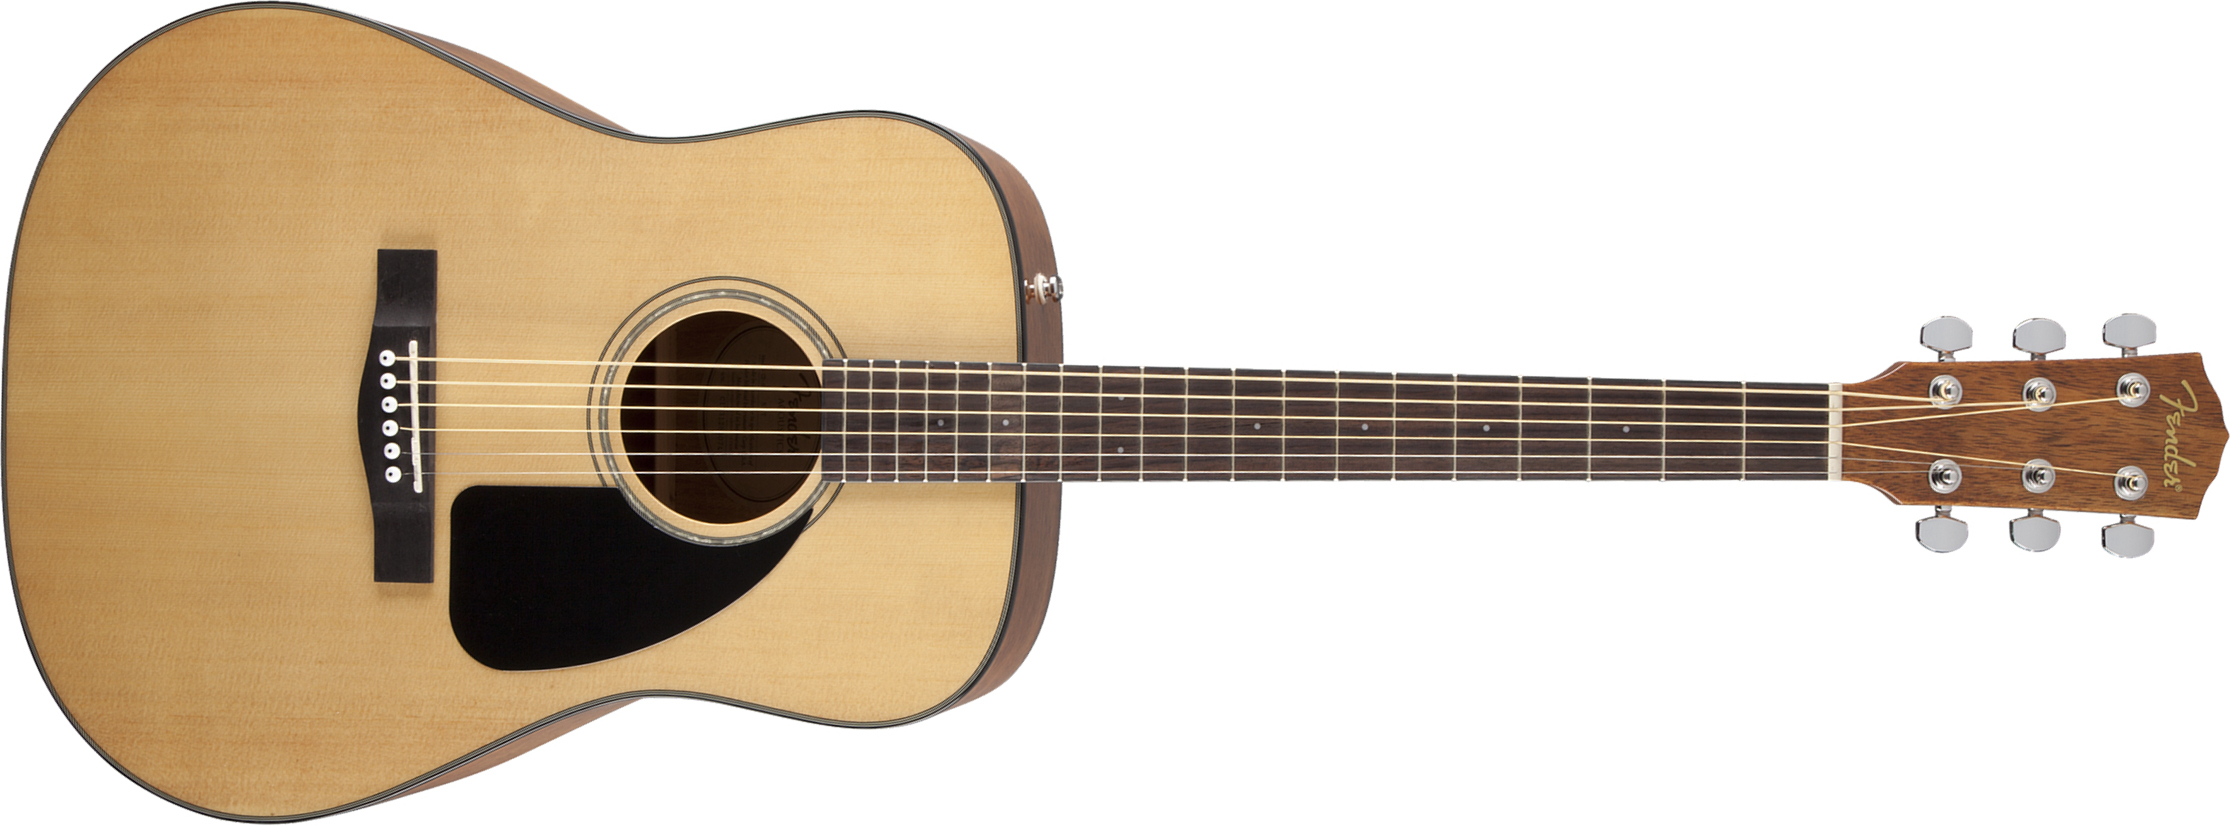 Fender Cd-60 Dreadnought V3 2020 Epicea Acajou Wal - Natural - Westerngitarre & electro - Main picture